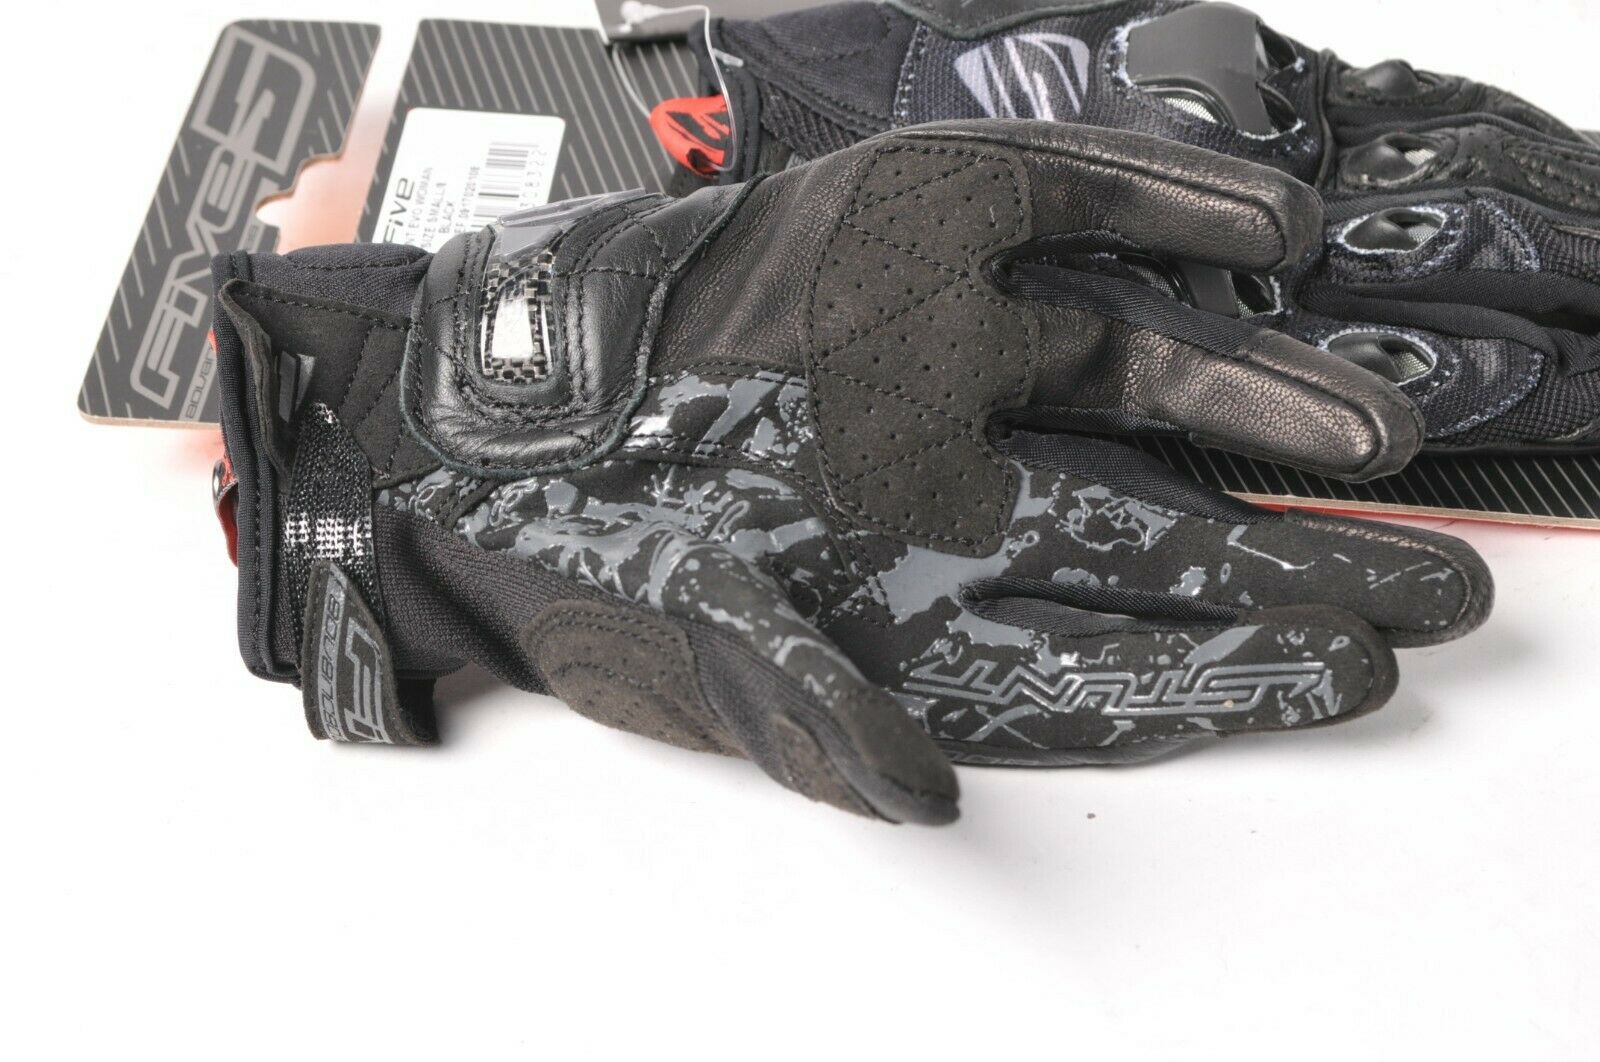 Five Stunt evo Black Leather/Textile Women's Motorcycle Gloves MD